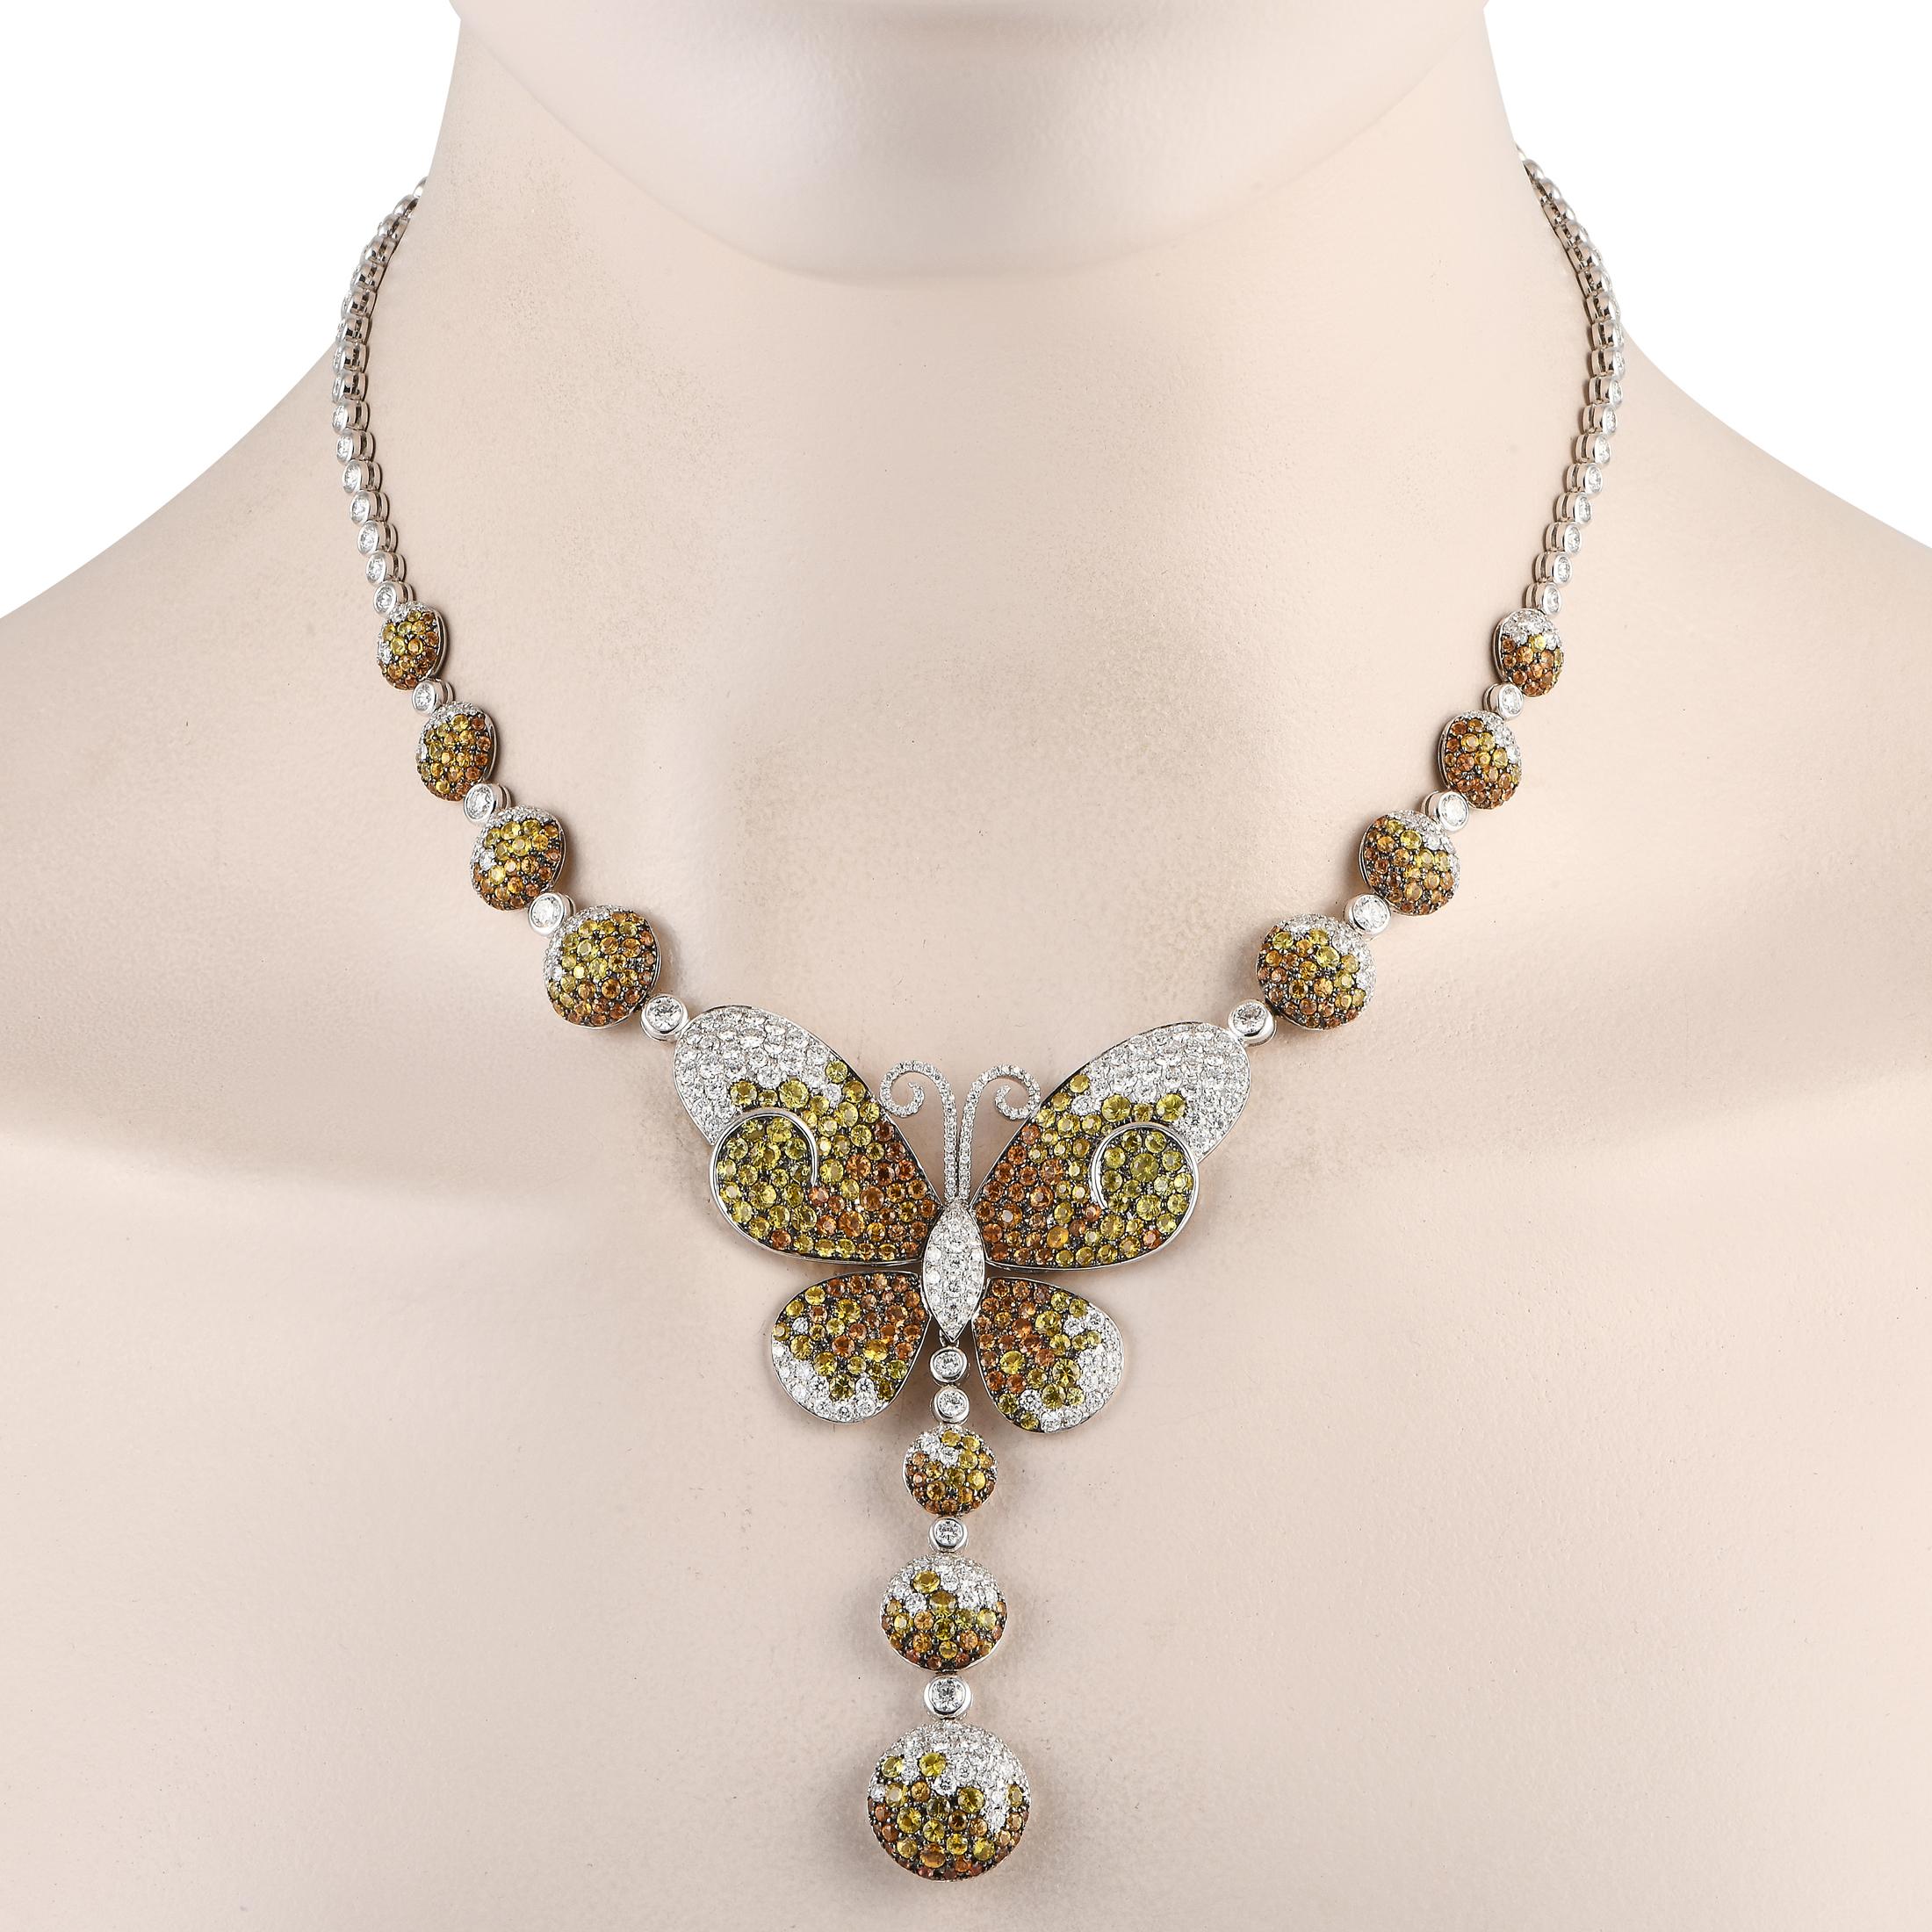 This necklace from Maggioro's Flight of Fantasy Collection is feminine and lovely. It is made of 18K white gold and boasts a design that features a gorgeous butterfly motif with spherical accents. All of which are set with 10.85 carats of diamonds